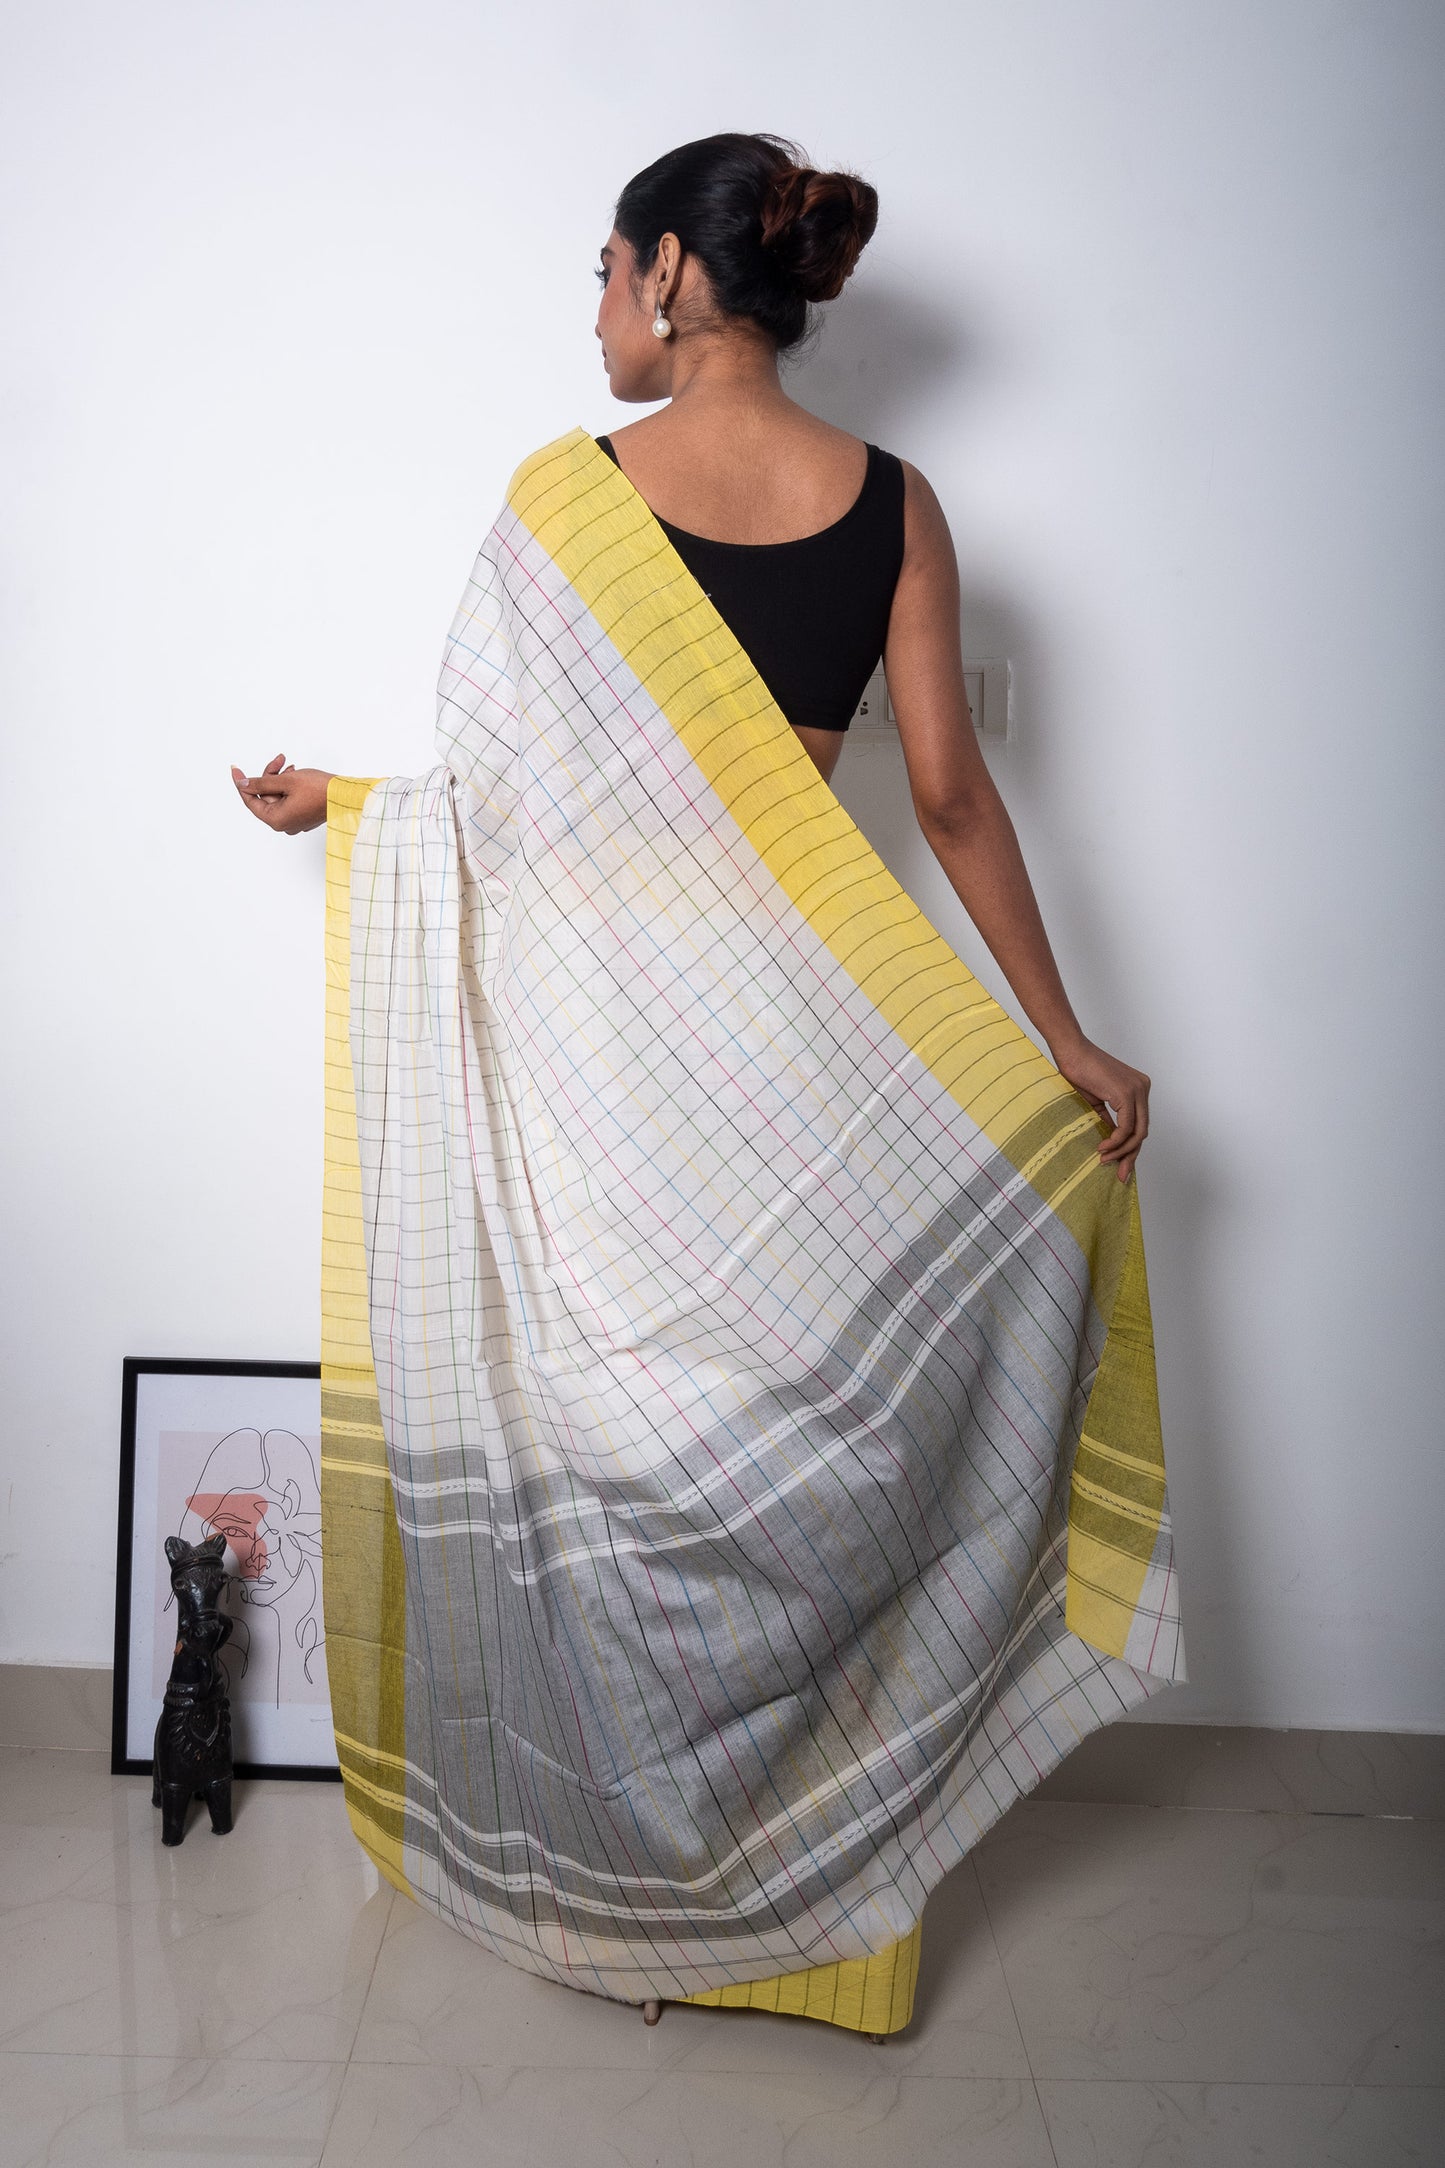 Off White Cotton Check Dhaniakhali Saree with Yellow Borders